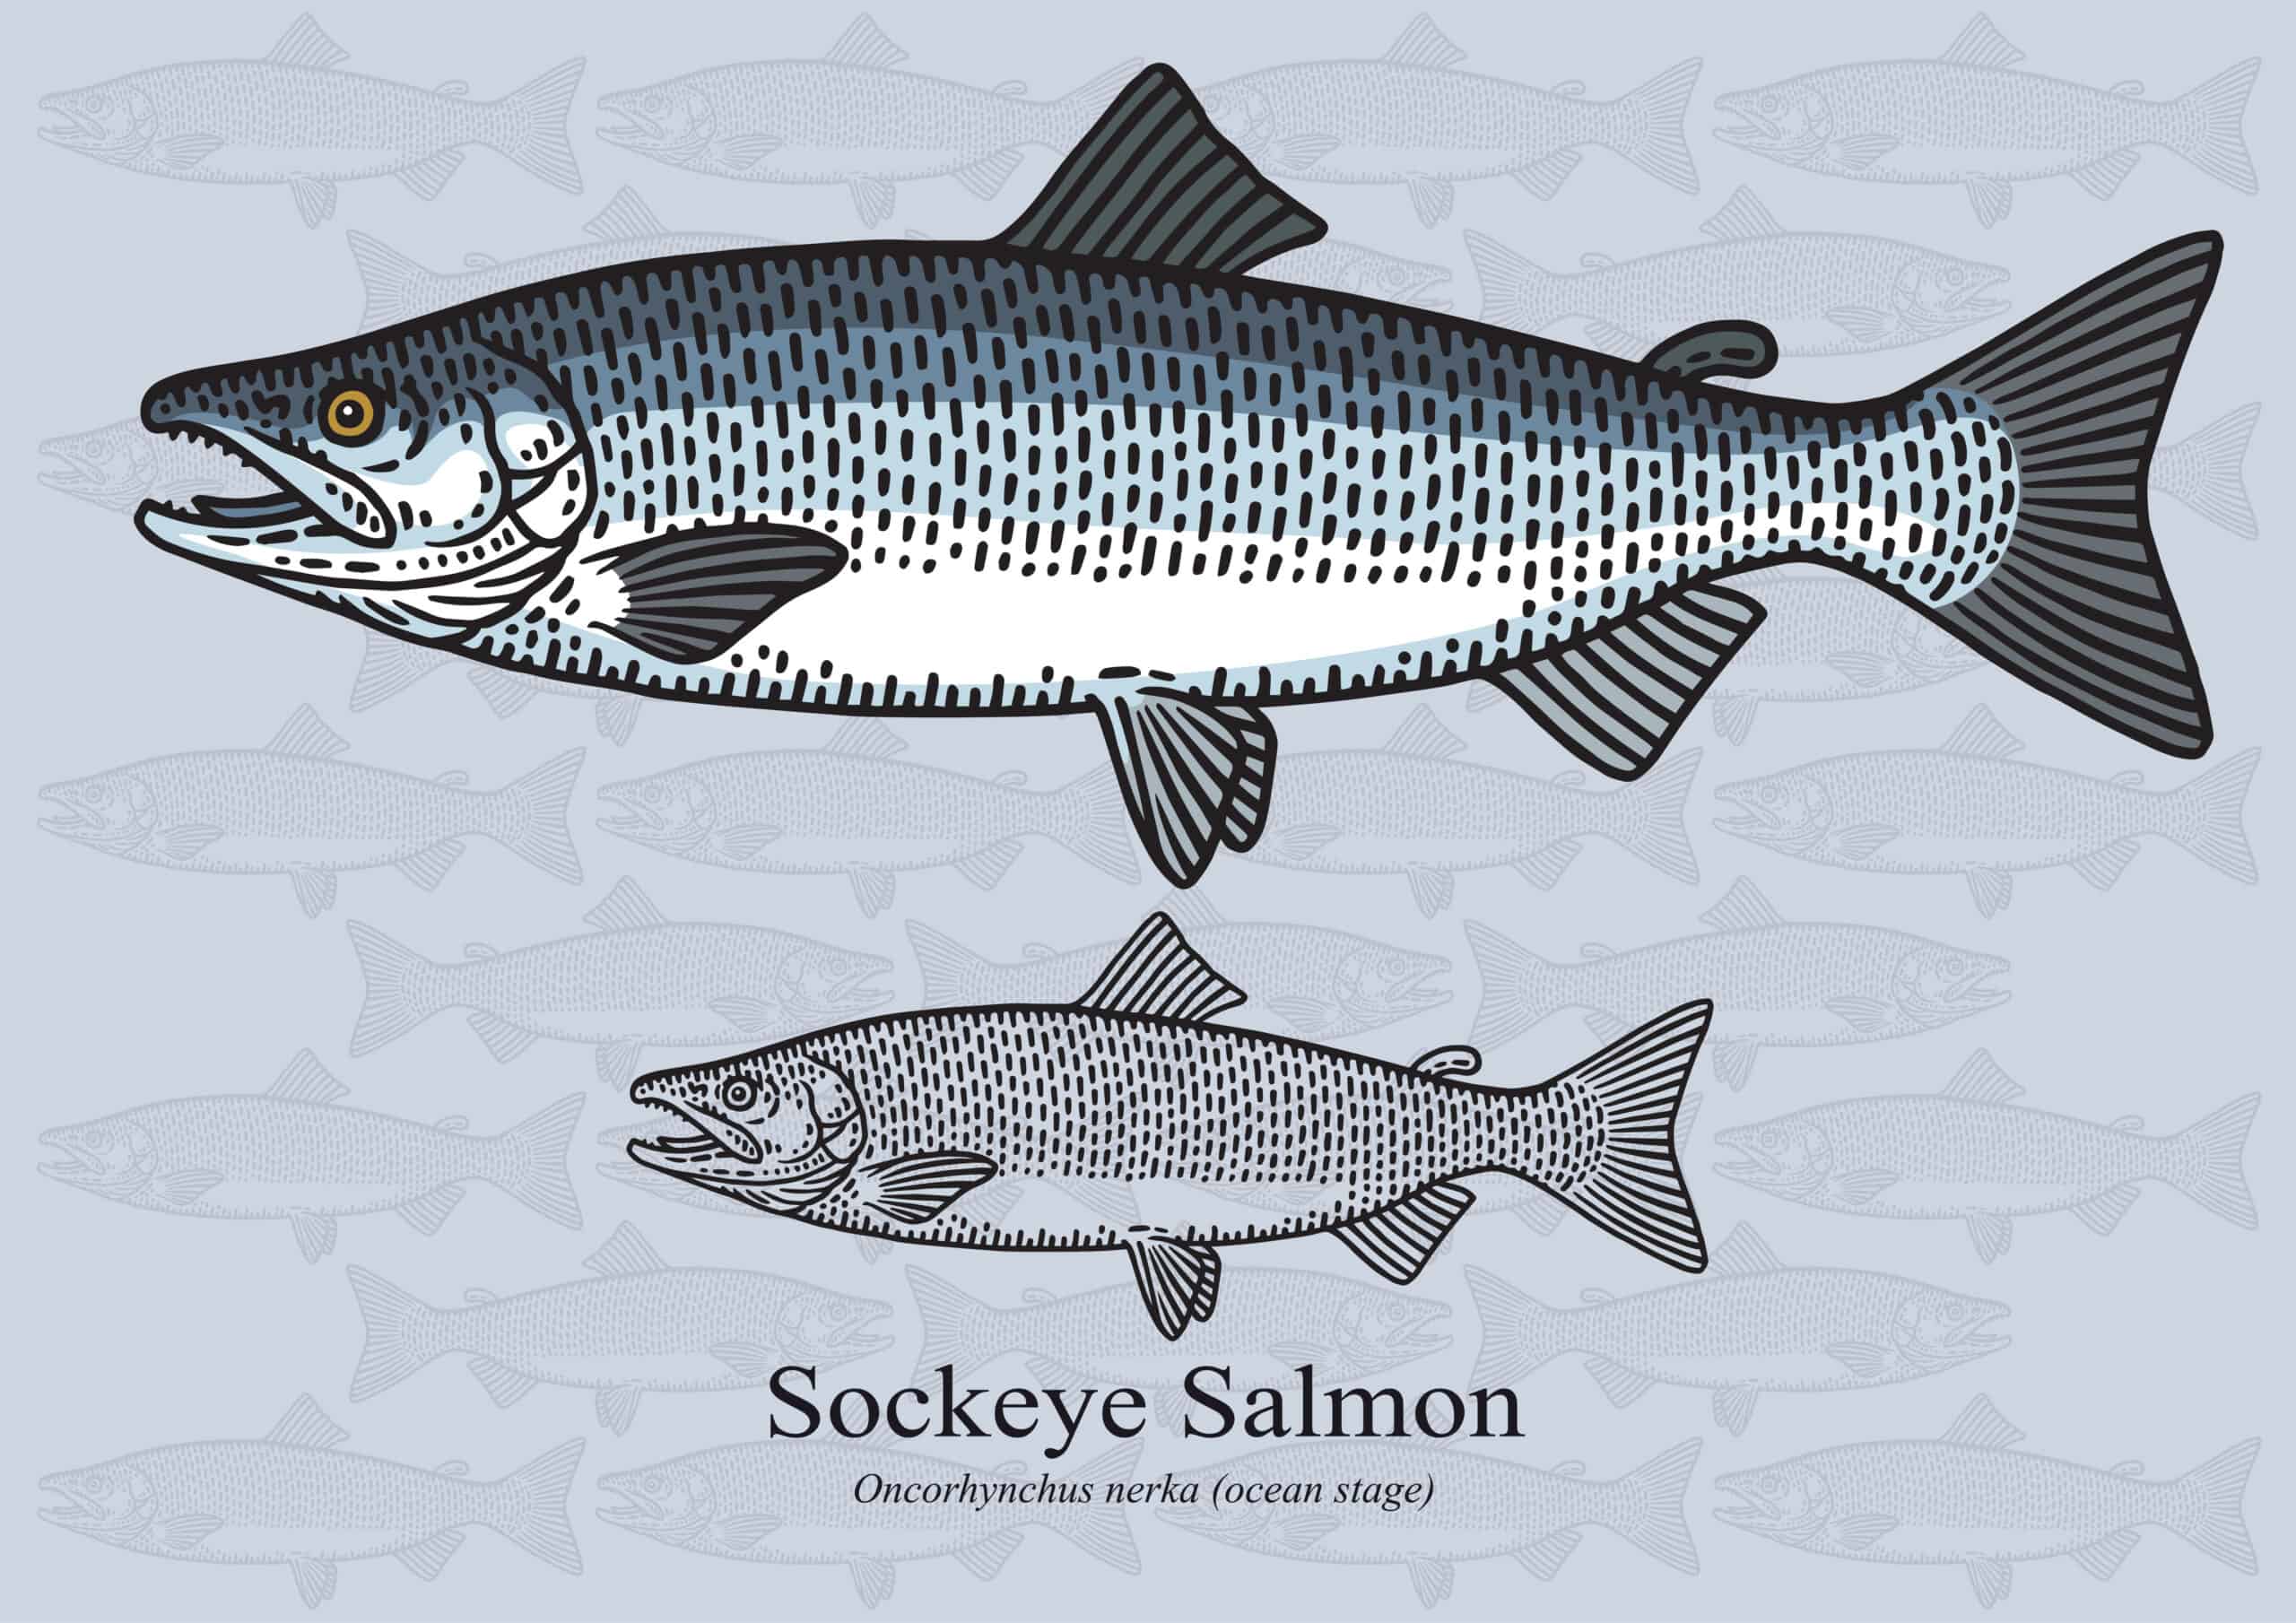 Figure drawing of an Sockeye Salmon in color and black and white.